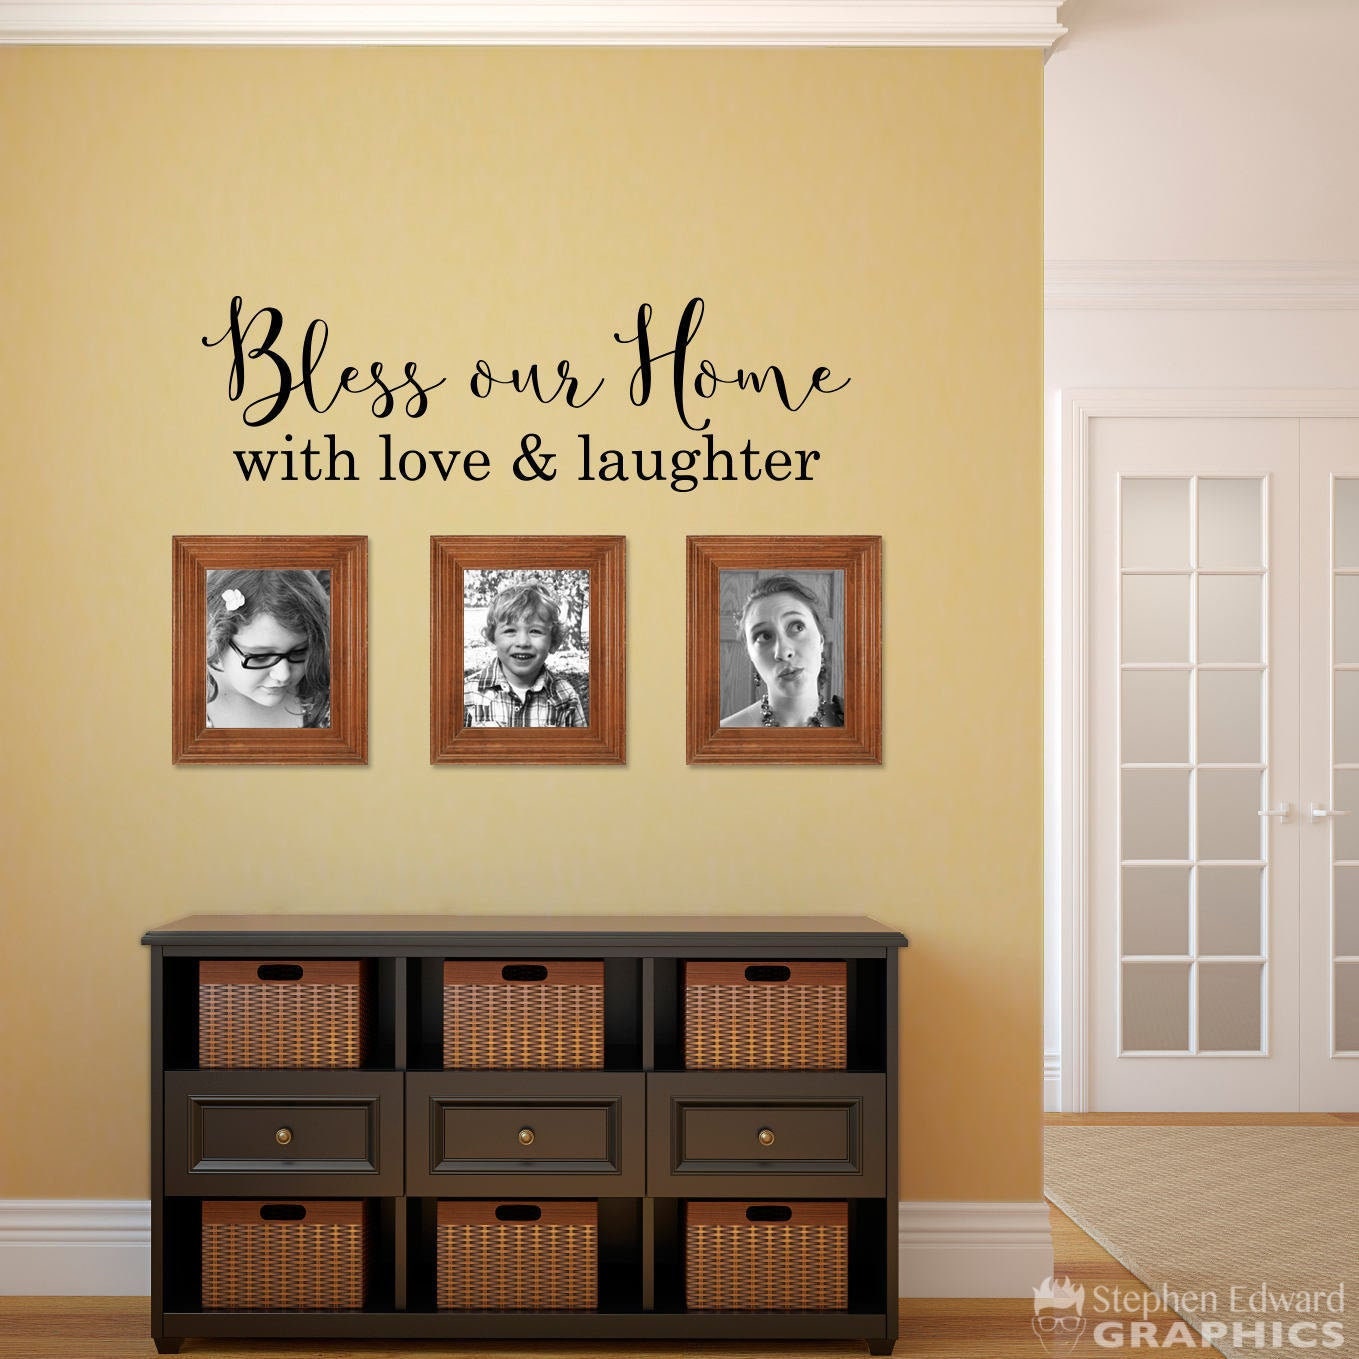 Bless our Home with love & laughter Decal | Home Wall Decal | Bless wall decor | Ver. 2